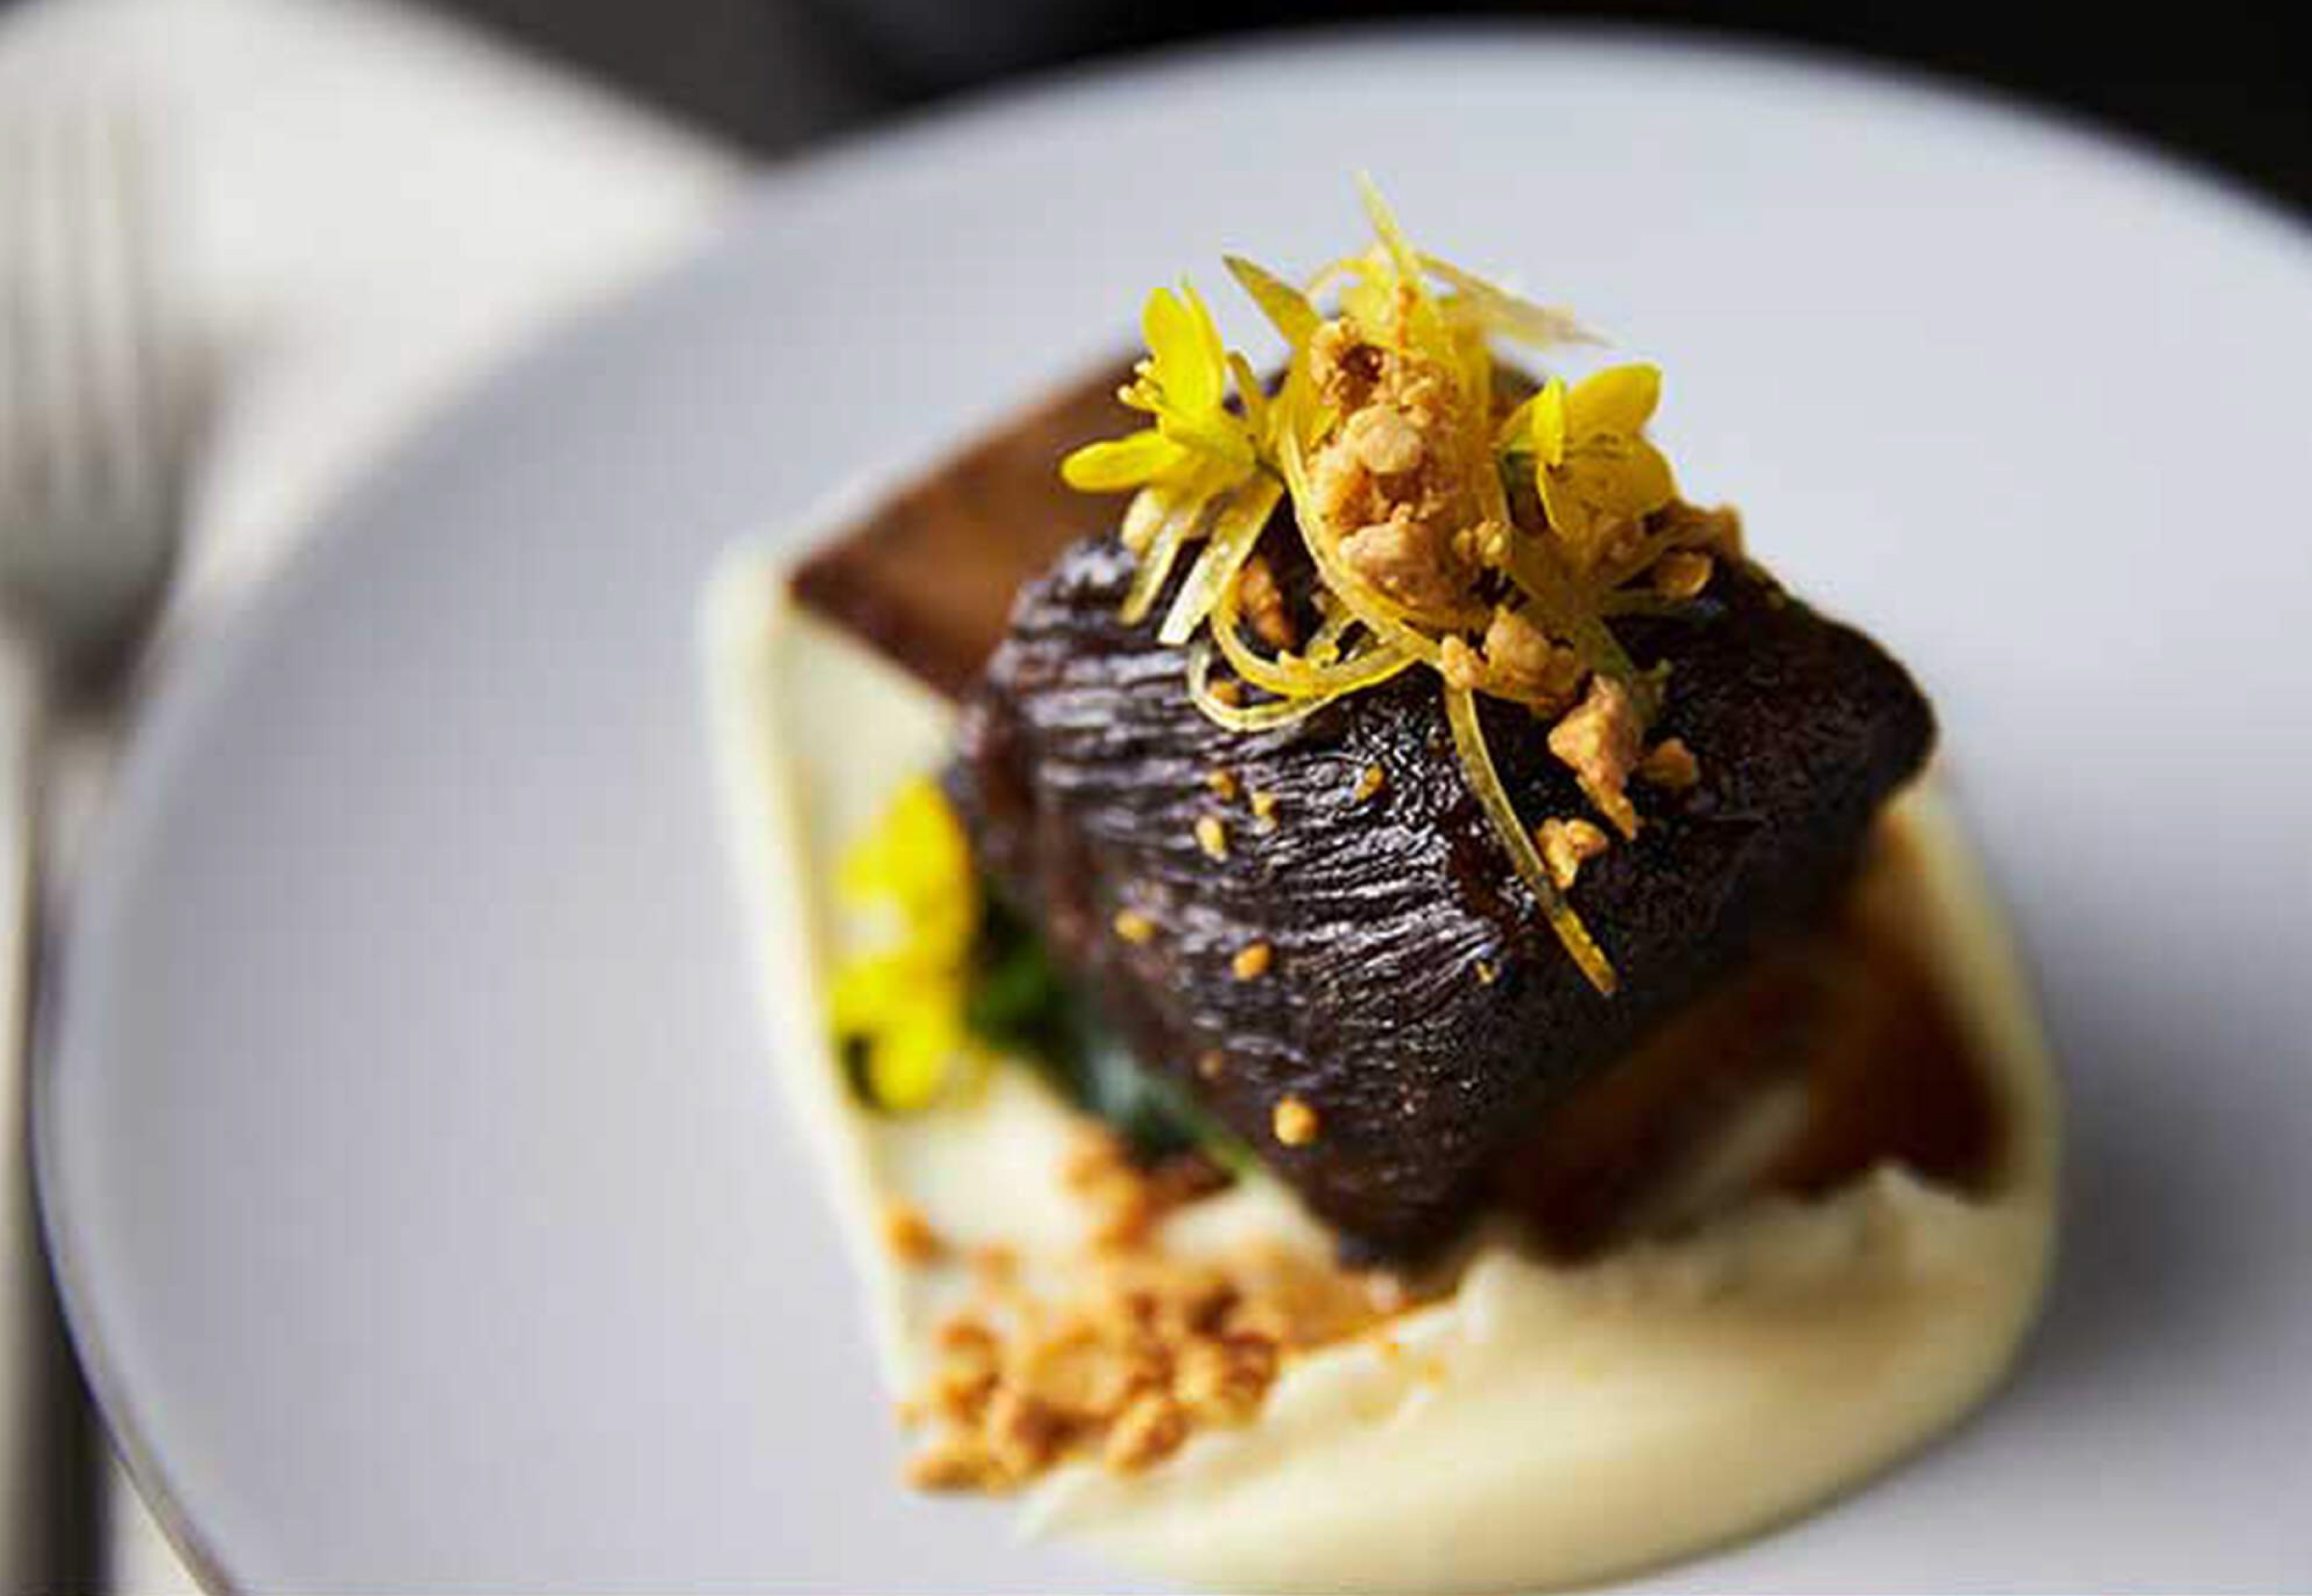 Short Rib Pastrami with Parsnip Puree, Wilted Arugula and Curried Almond.